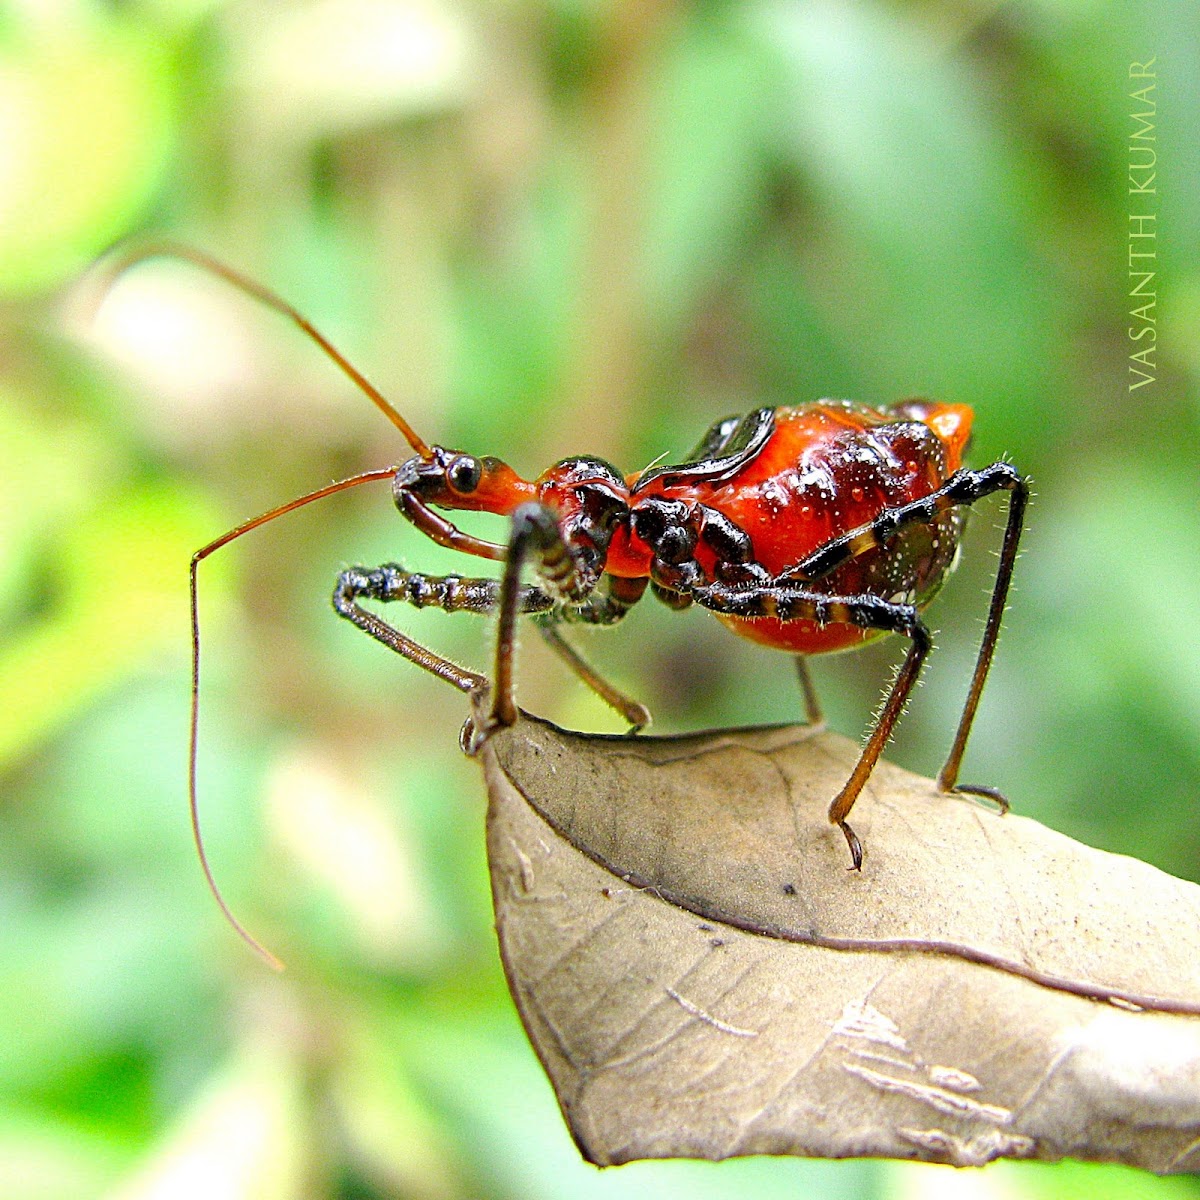 Nymph of an assassin bug